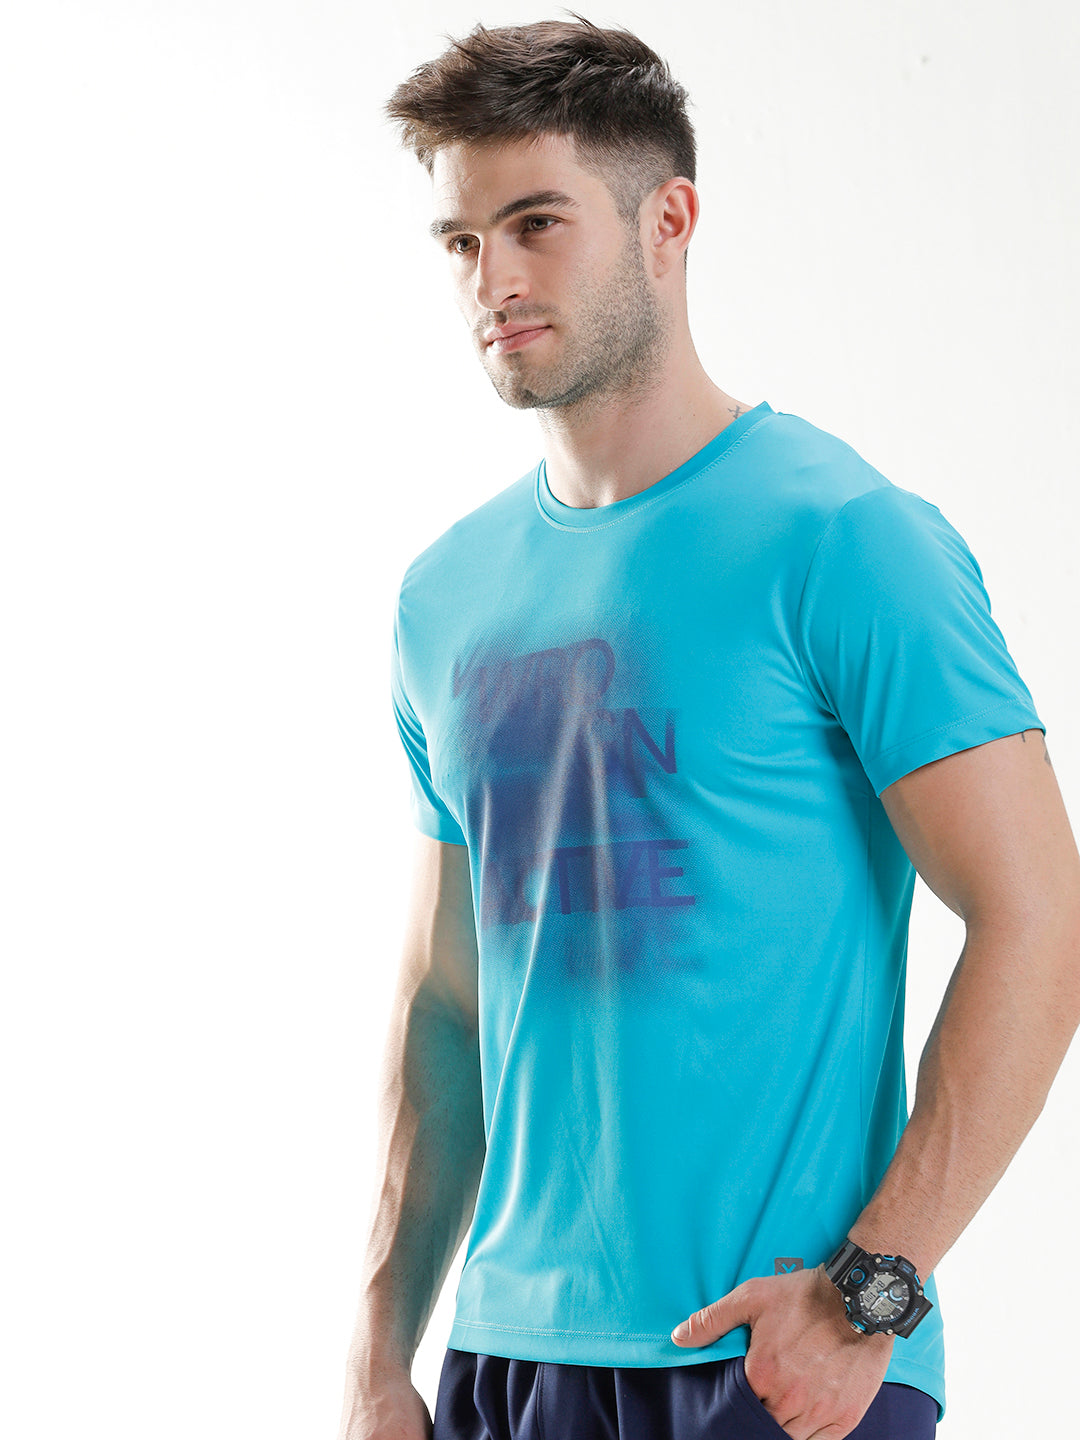 Wrogn Smudge Active T-Shirt